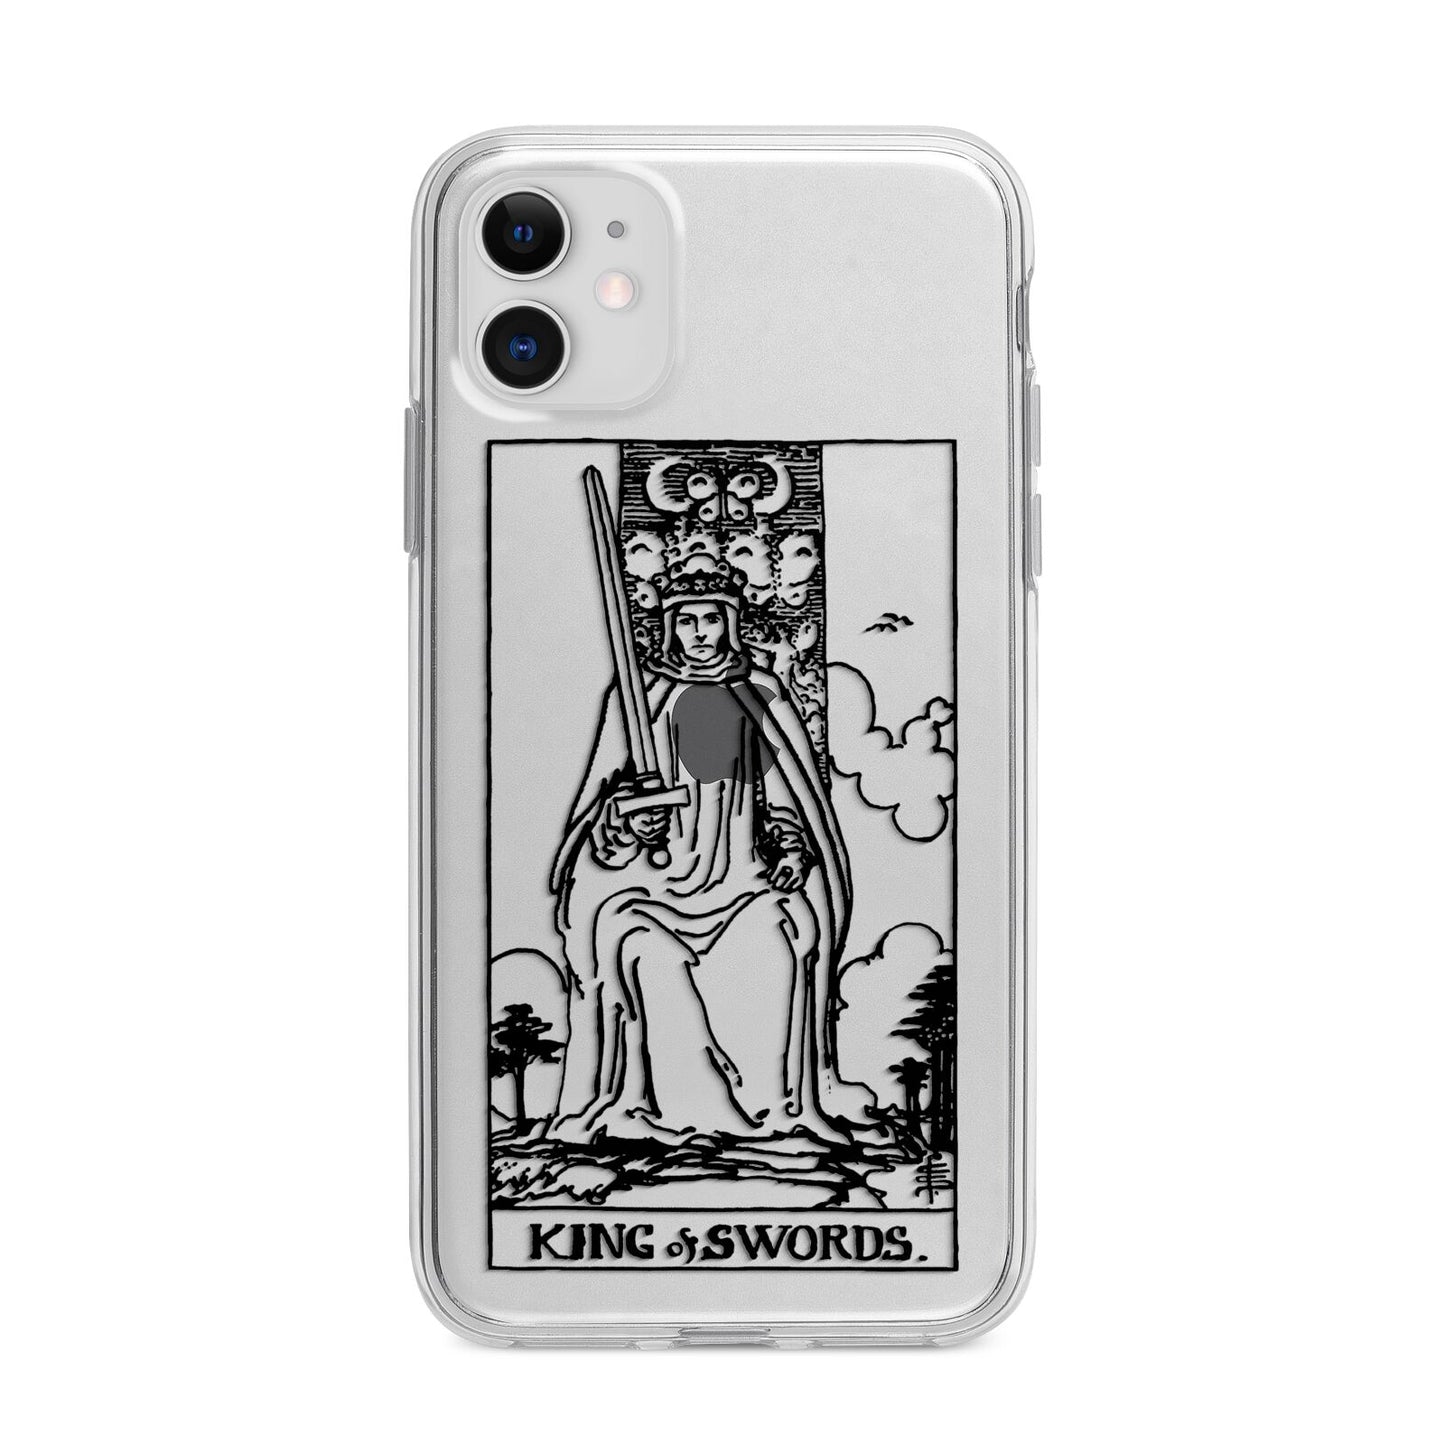 King of Swords Monochrome Apple iPhone 11 in White with Bumper Case